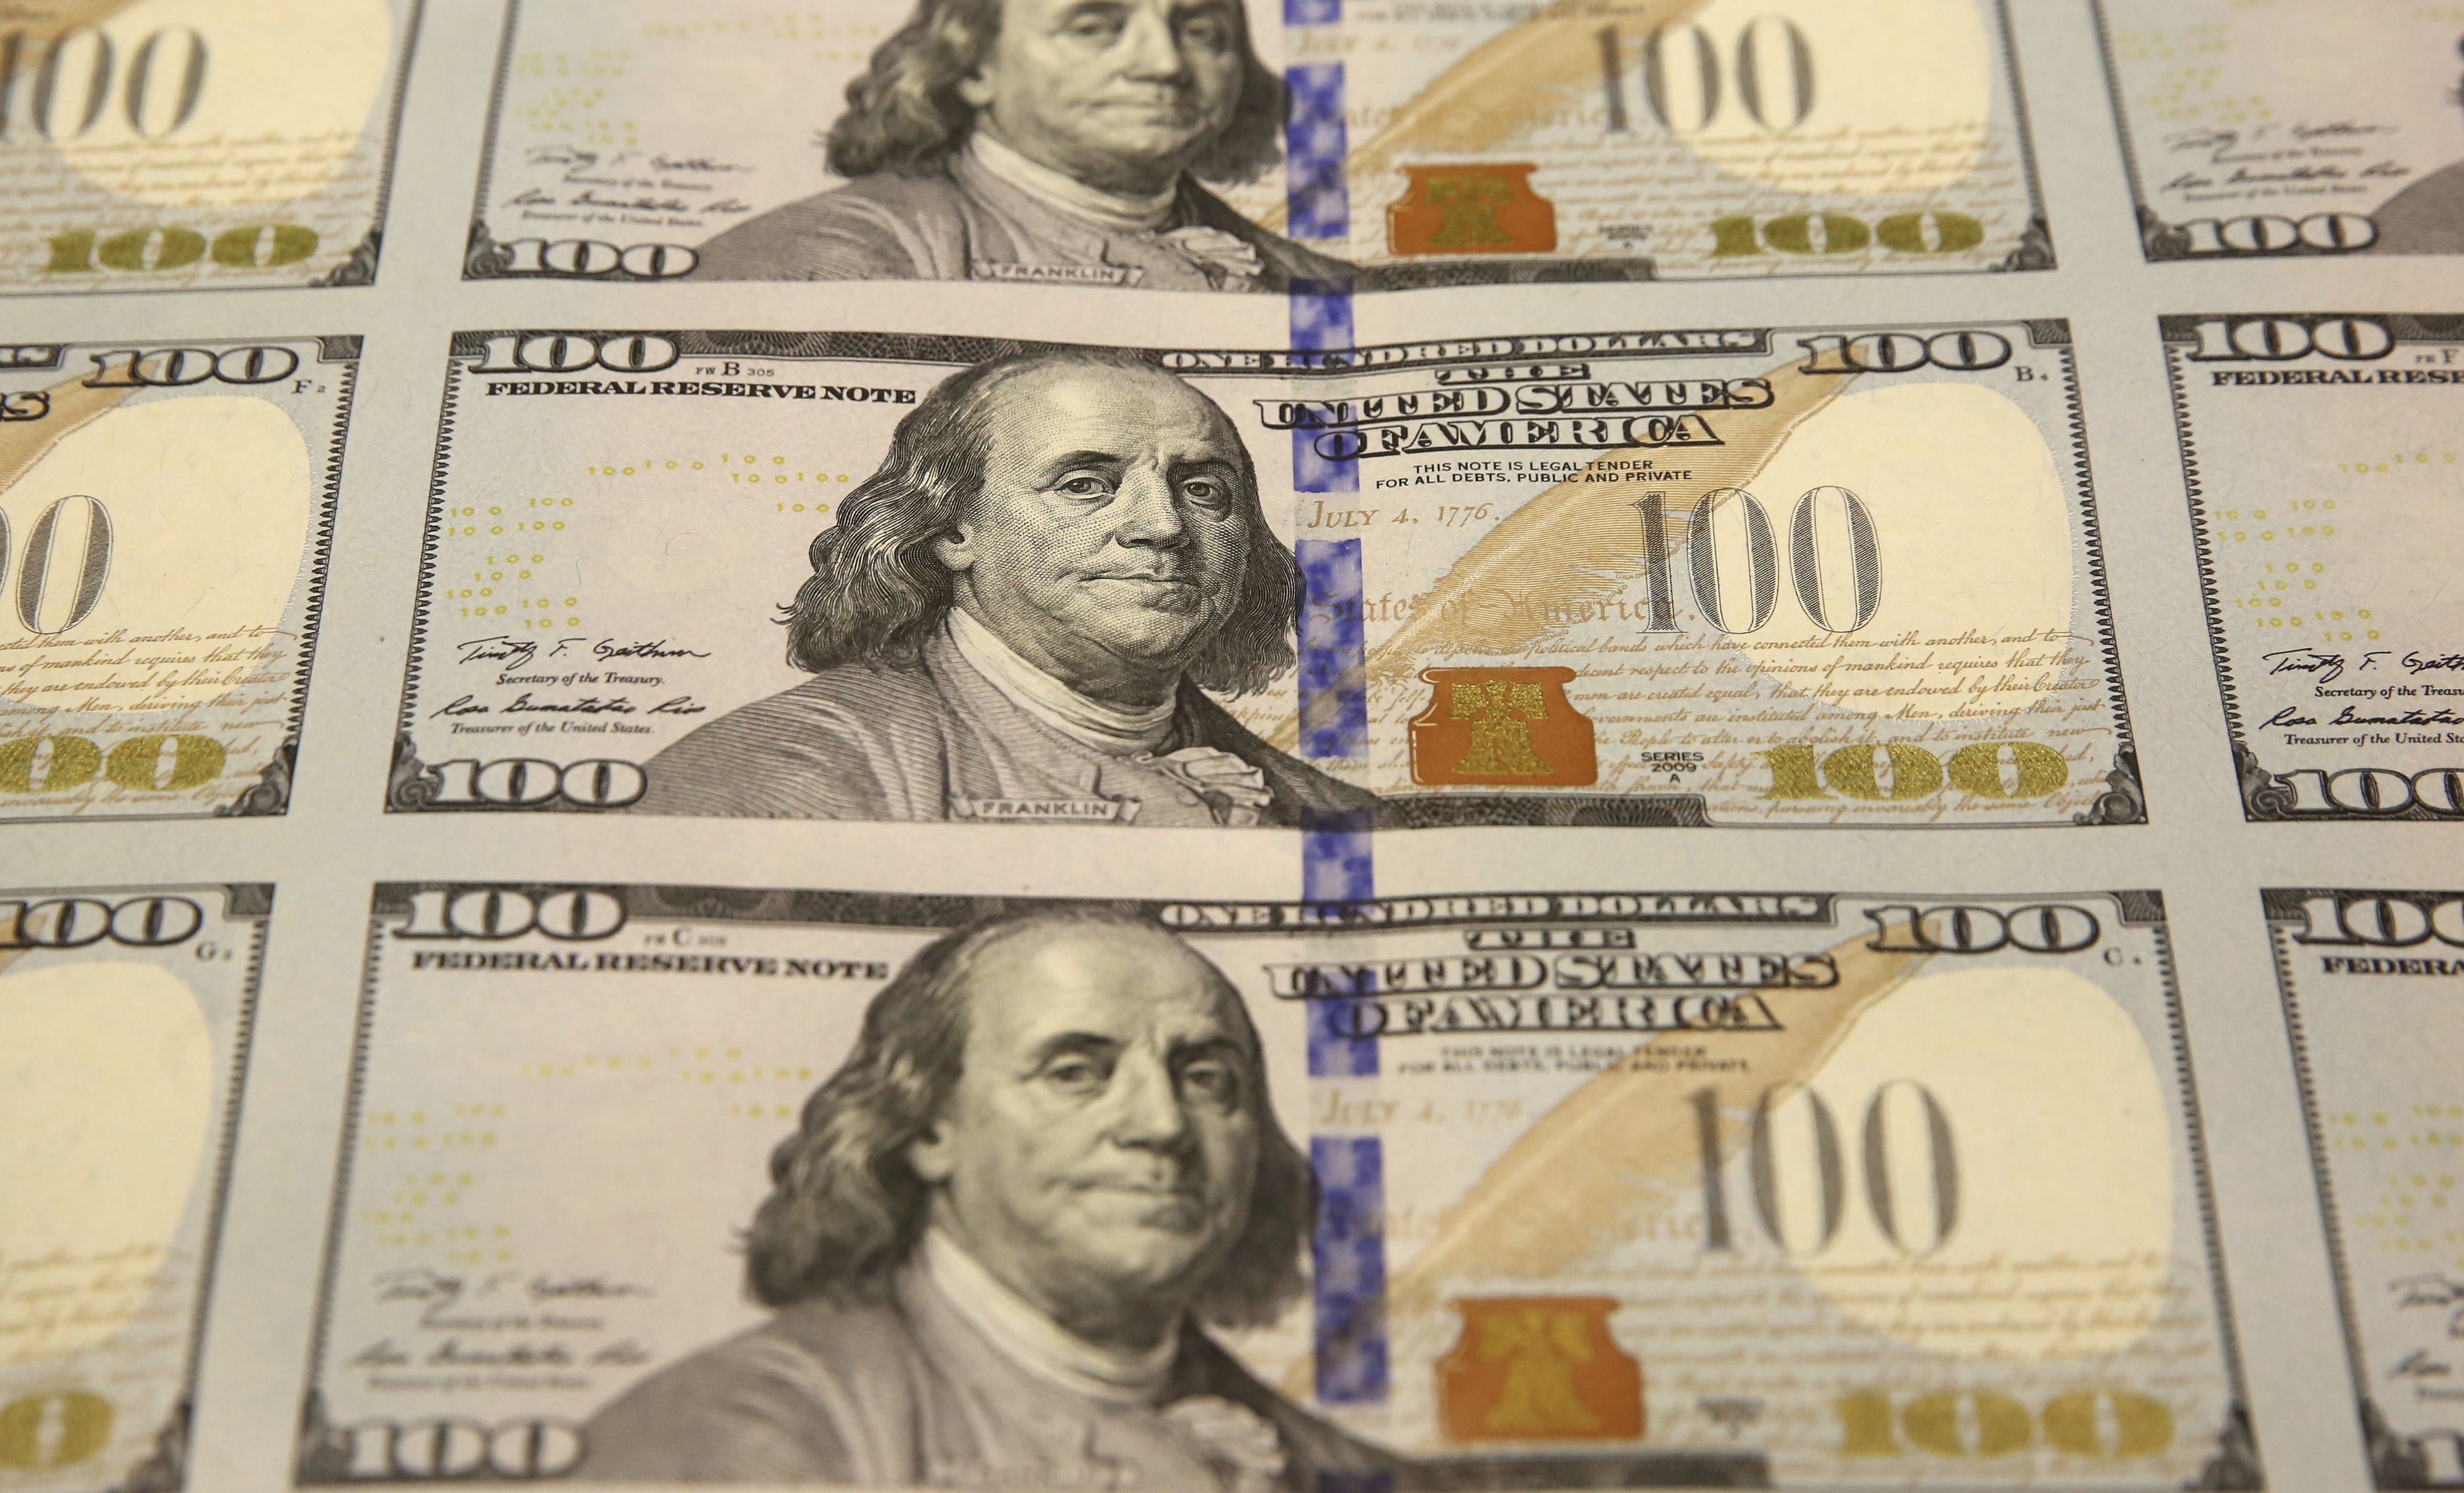 More than US$5,000 has been given away by the person behind HiddenCash. Photo: AP